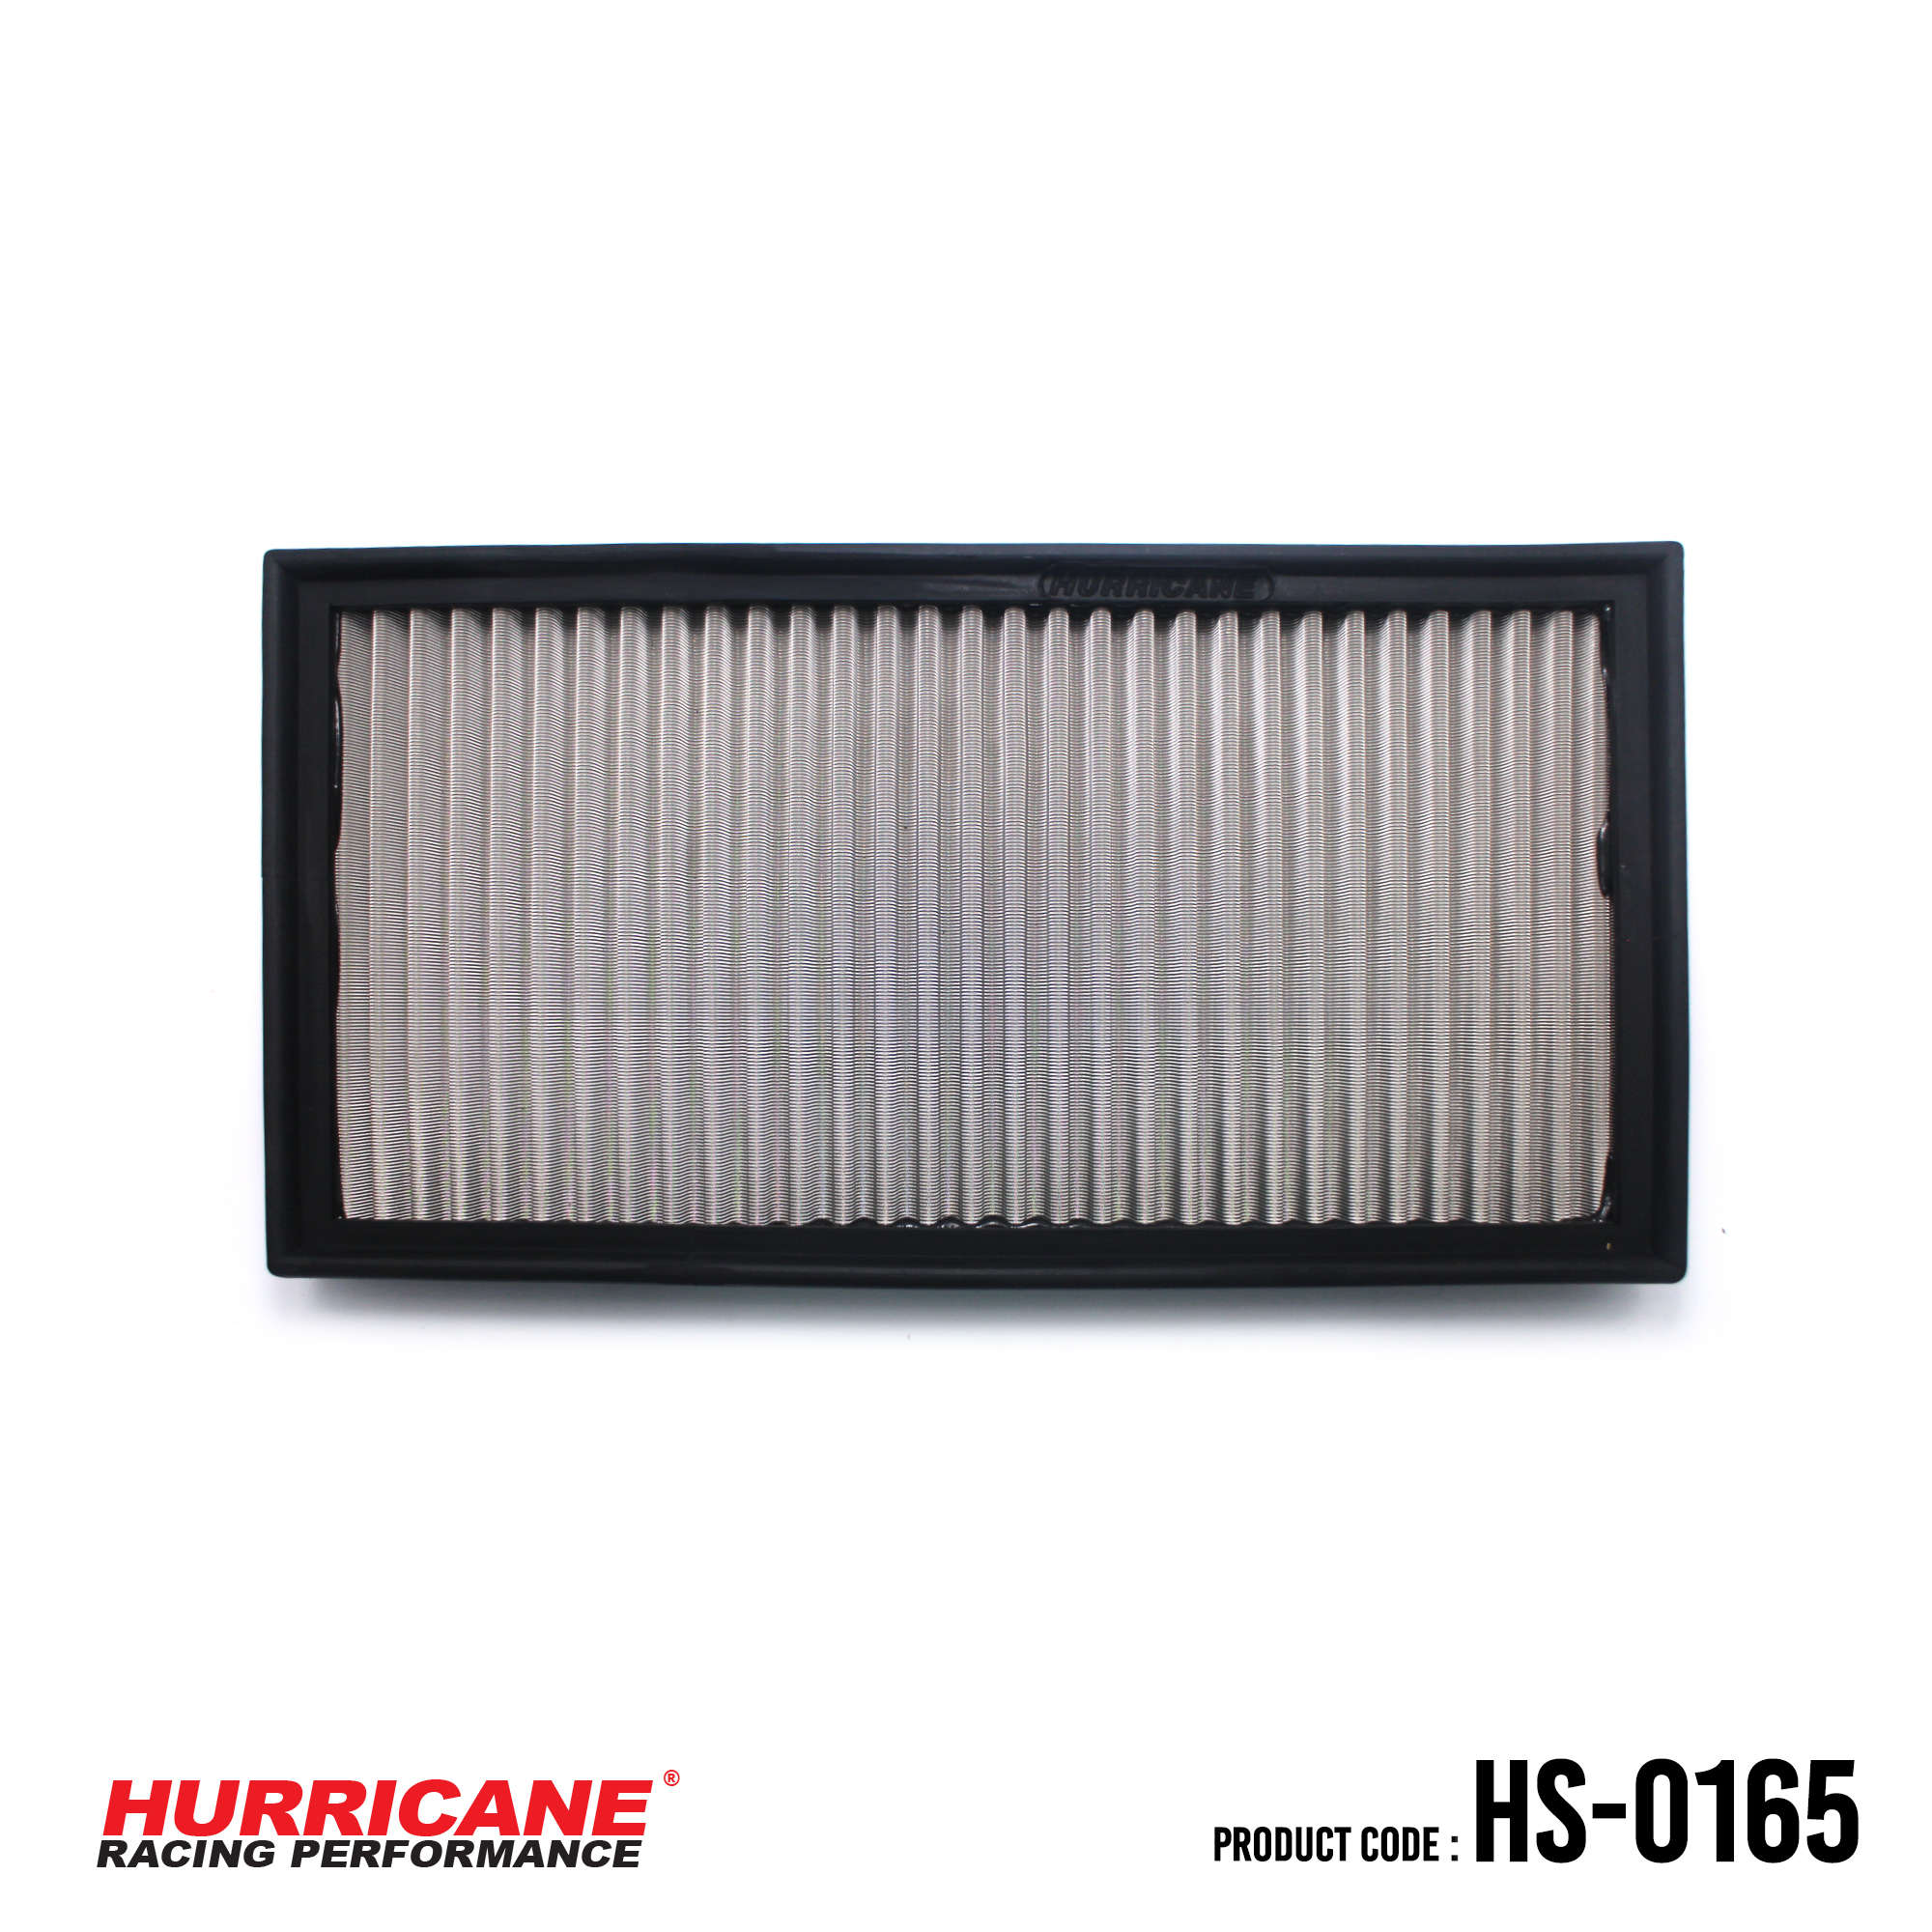 HURRICANE STAINLESS STEEL AIR FILTER FOR HS-0165 Volvo